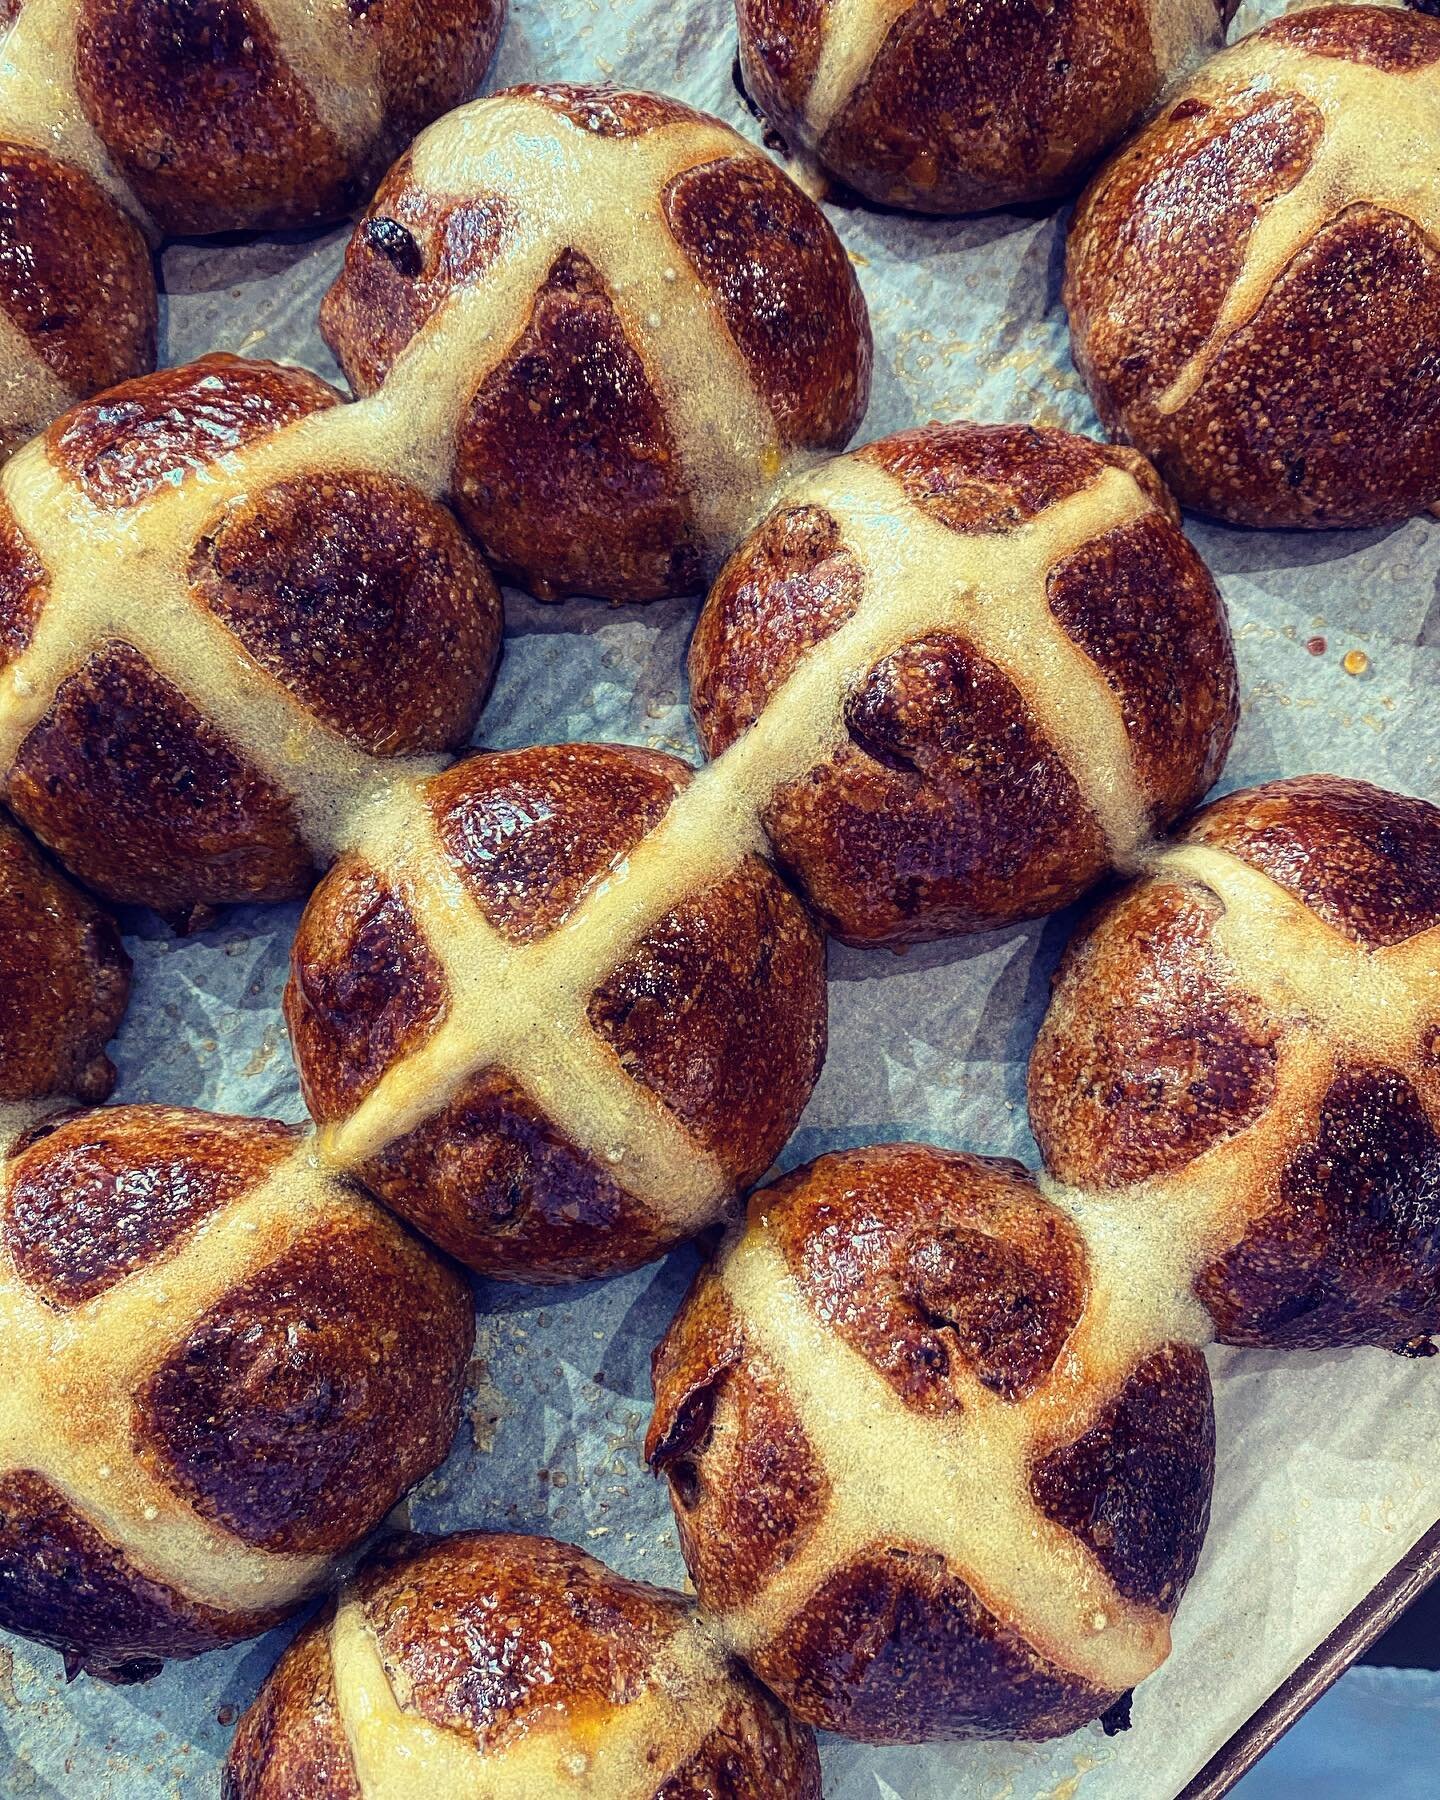 🐣HOT CROSS BUNS ARE BACK! 🐣

Baked this morning, we have lots of delicious, squishy, sourdough hot cross buns and mini tins in the shop today! 

#easterbaking #hotcrossbuns #rugbysmallbusiness